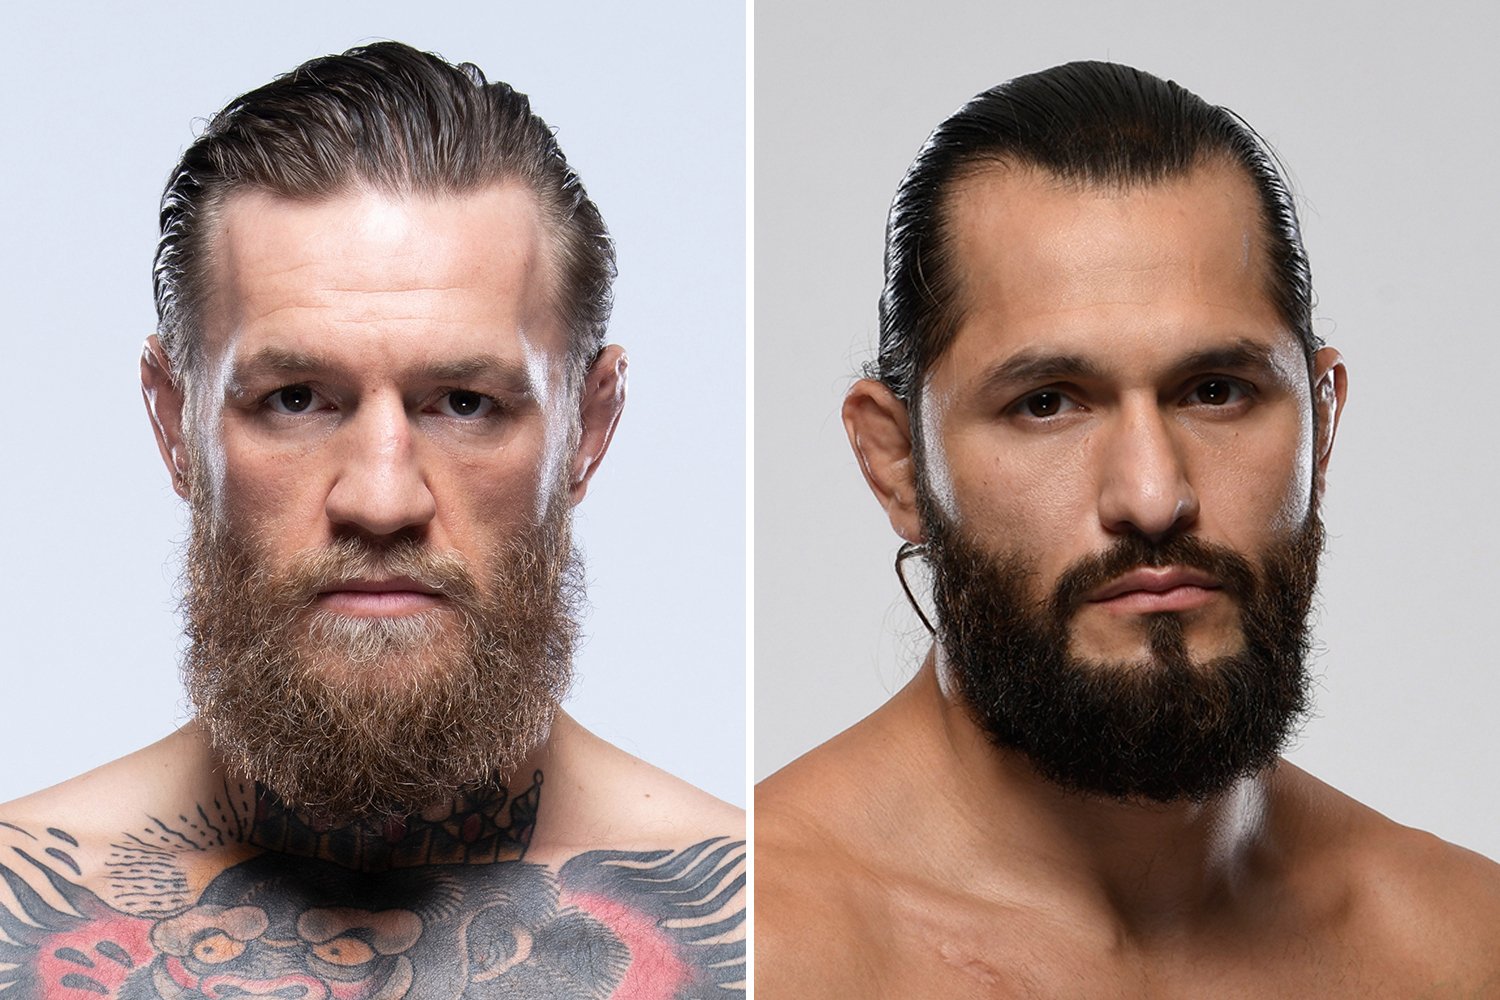 Conor McGregor vs Jorge Masvidal would be biggest fight in UFC says White, as he hints at comeback for Notorious